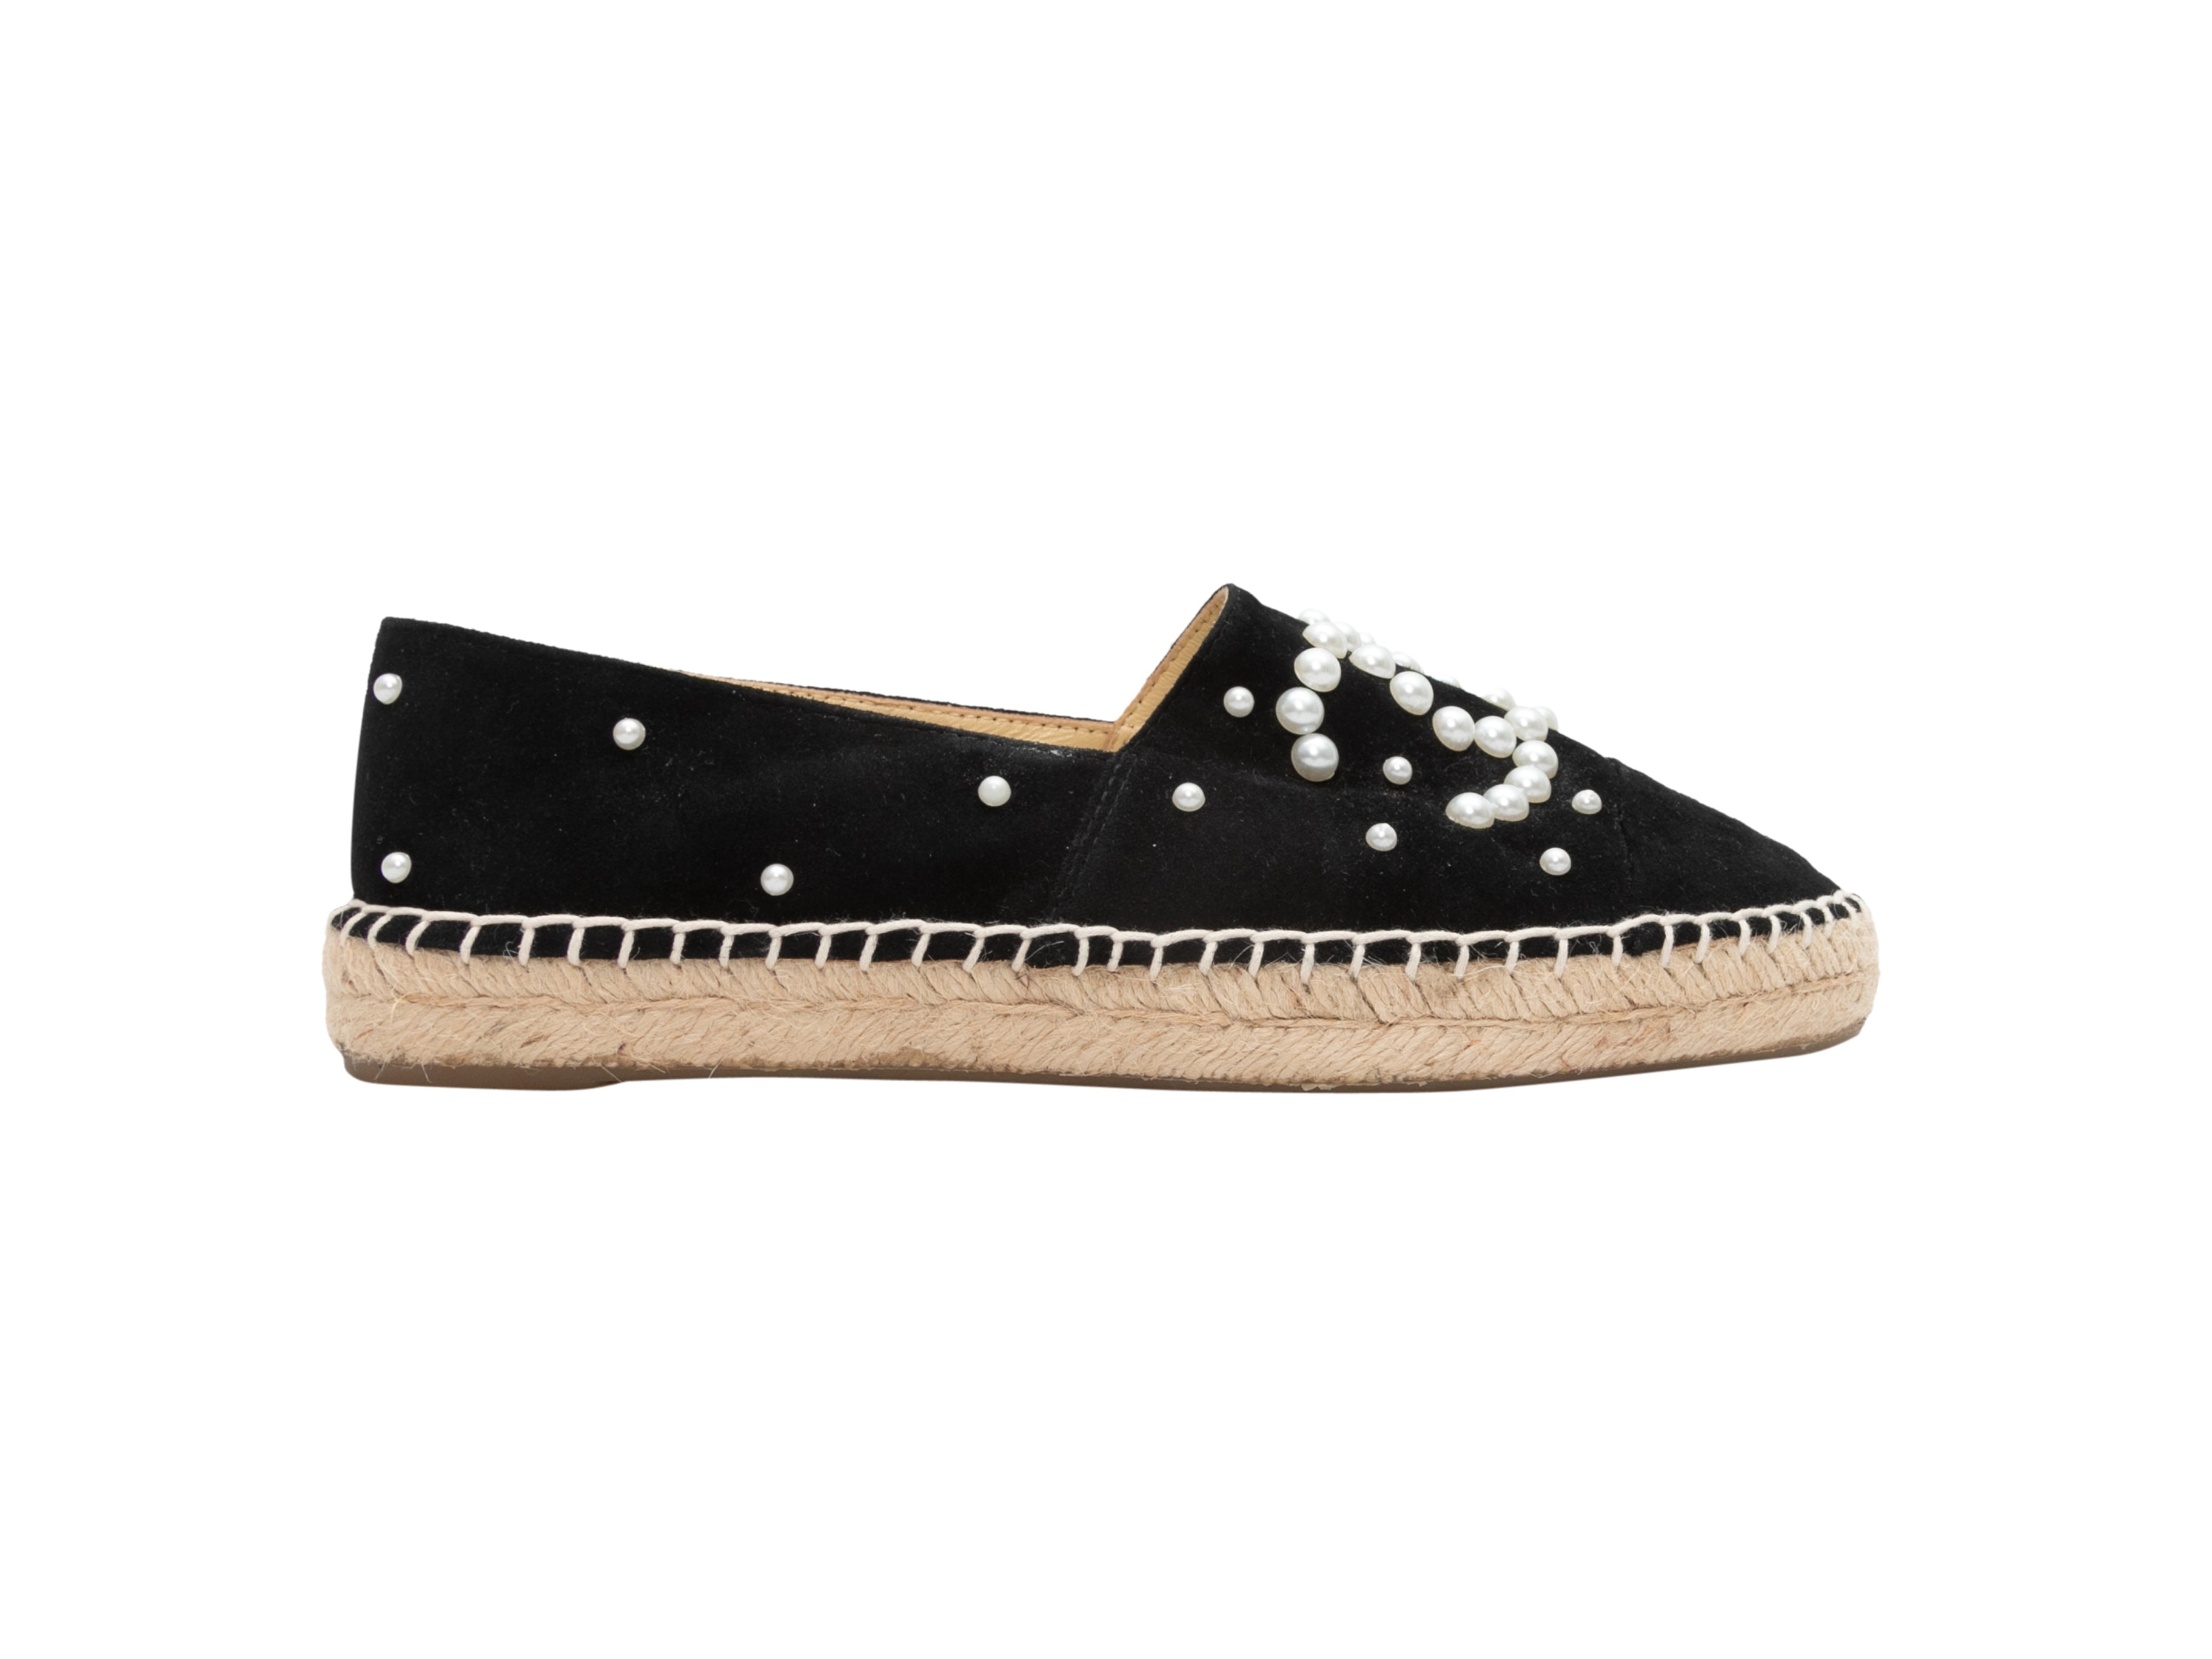 Chanel - Authenticated Espadrille - Leather Black Plain for Women, Good Condition